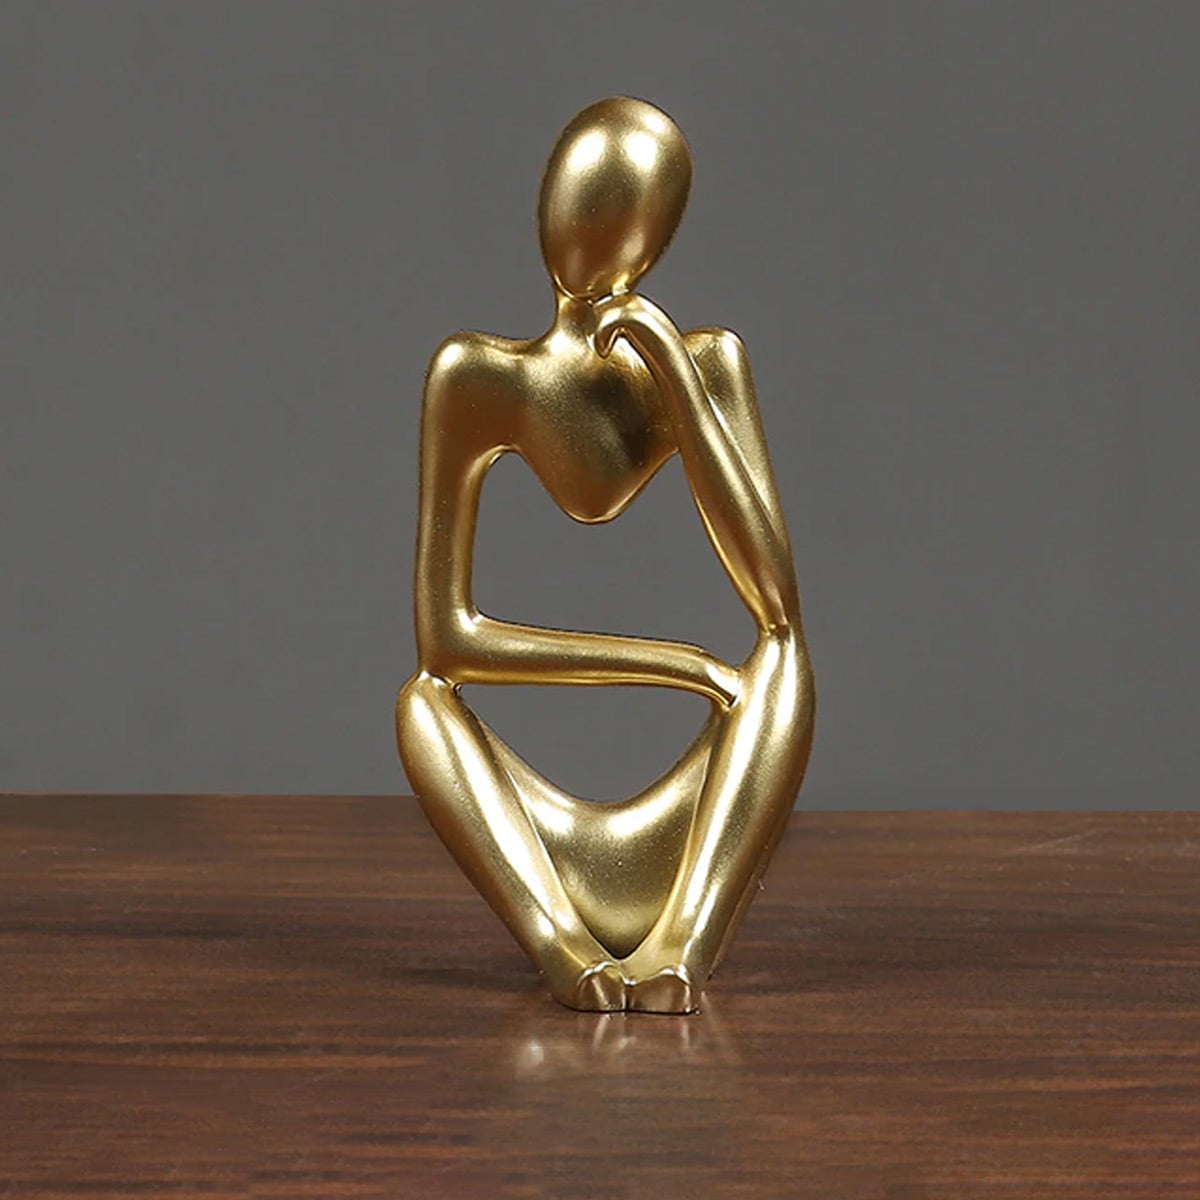 Thinker Statue Abstract Figure Sculpture Character Statue Ornaments Art